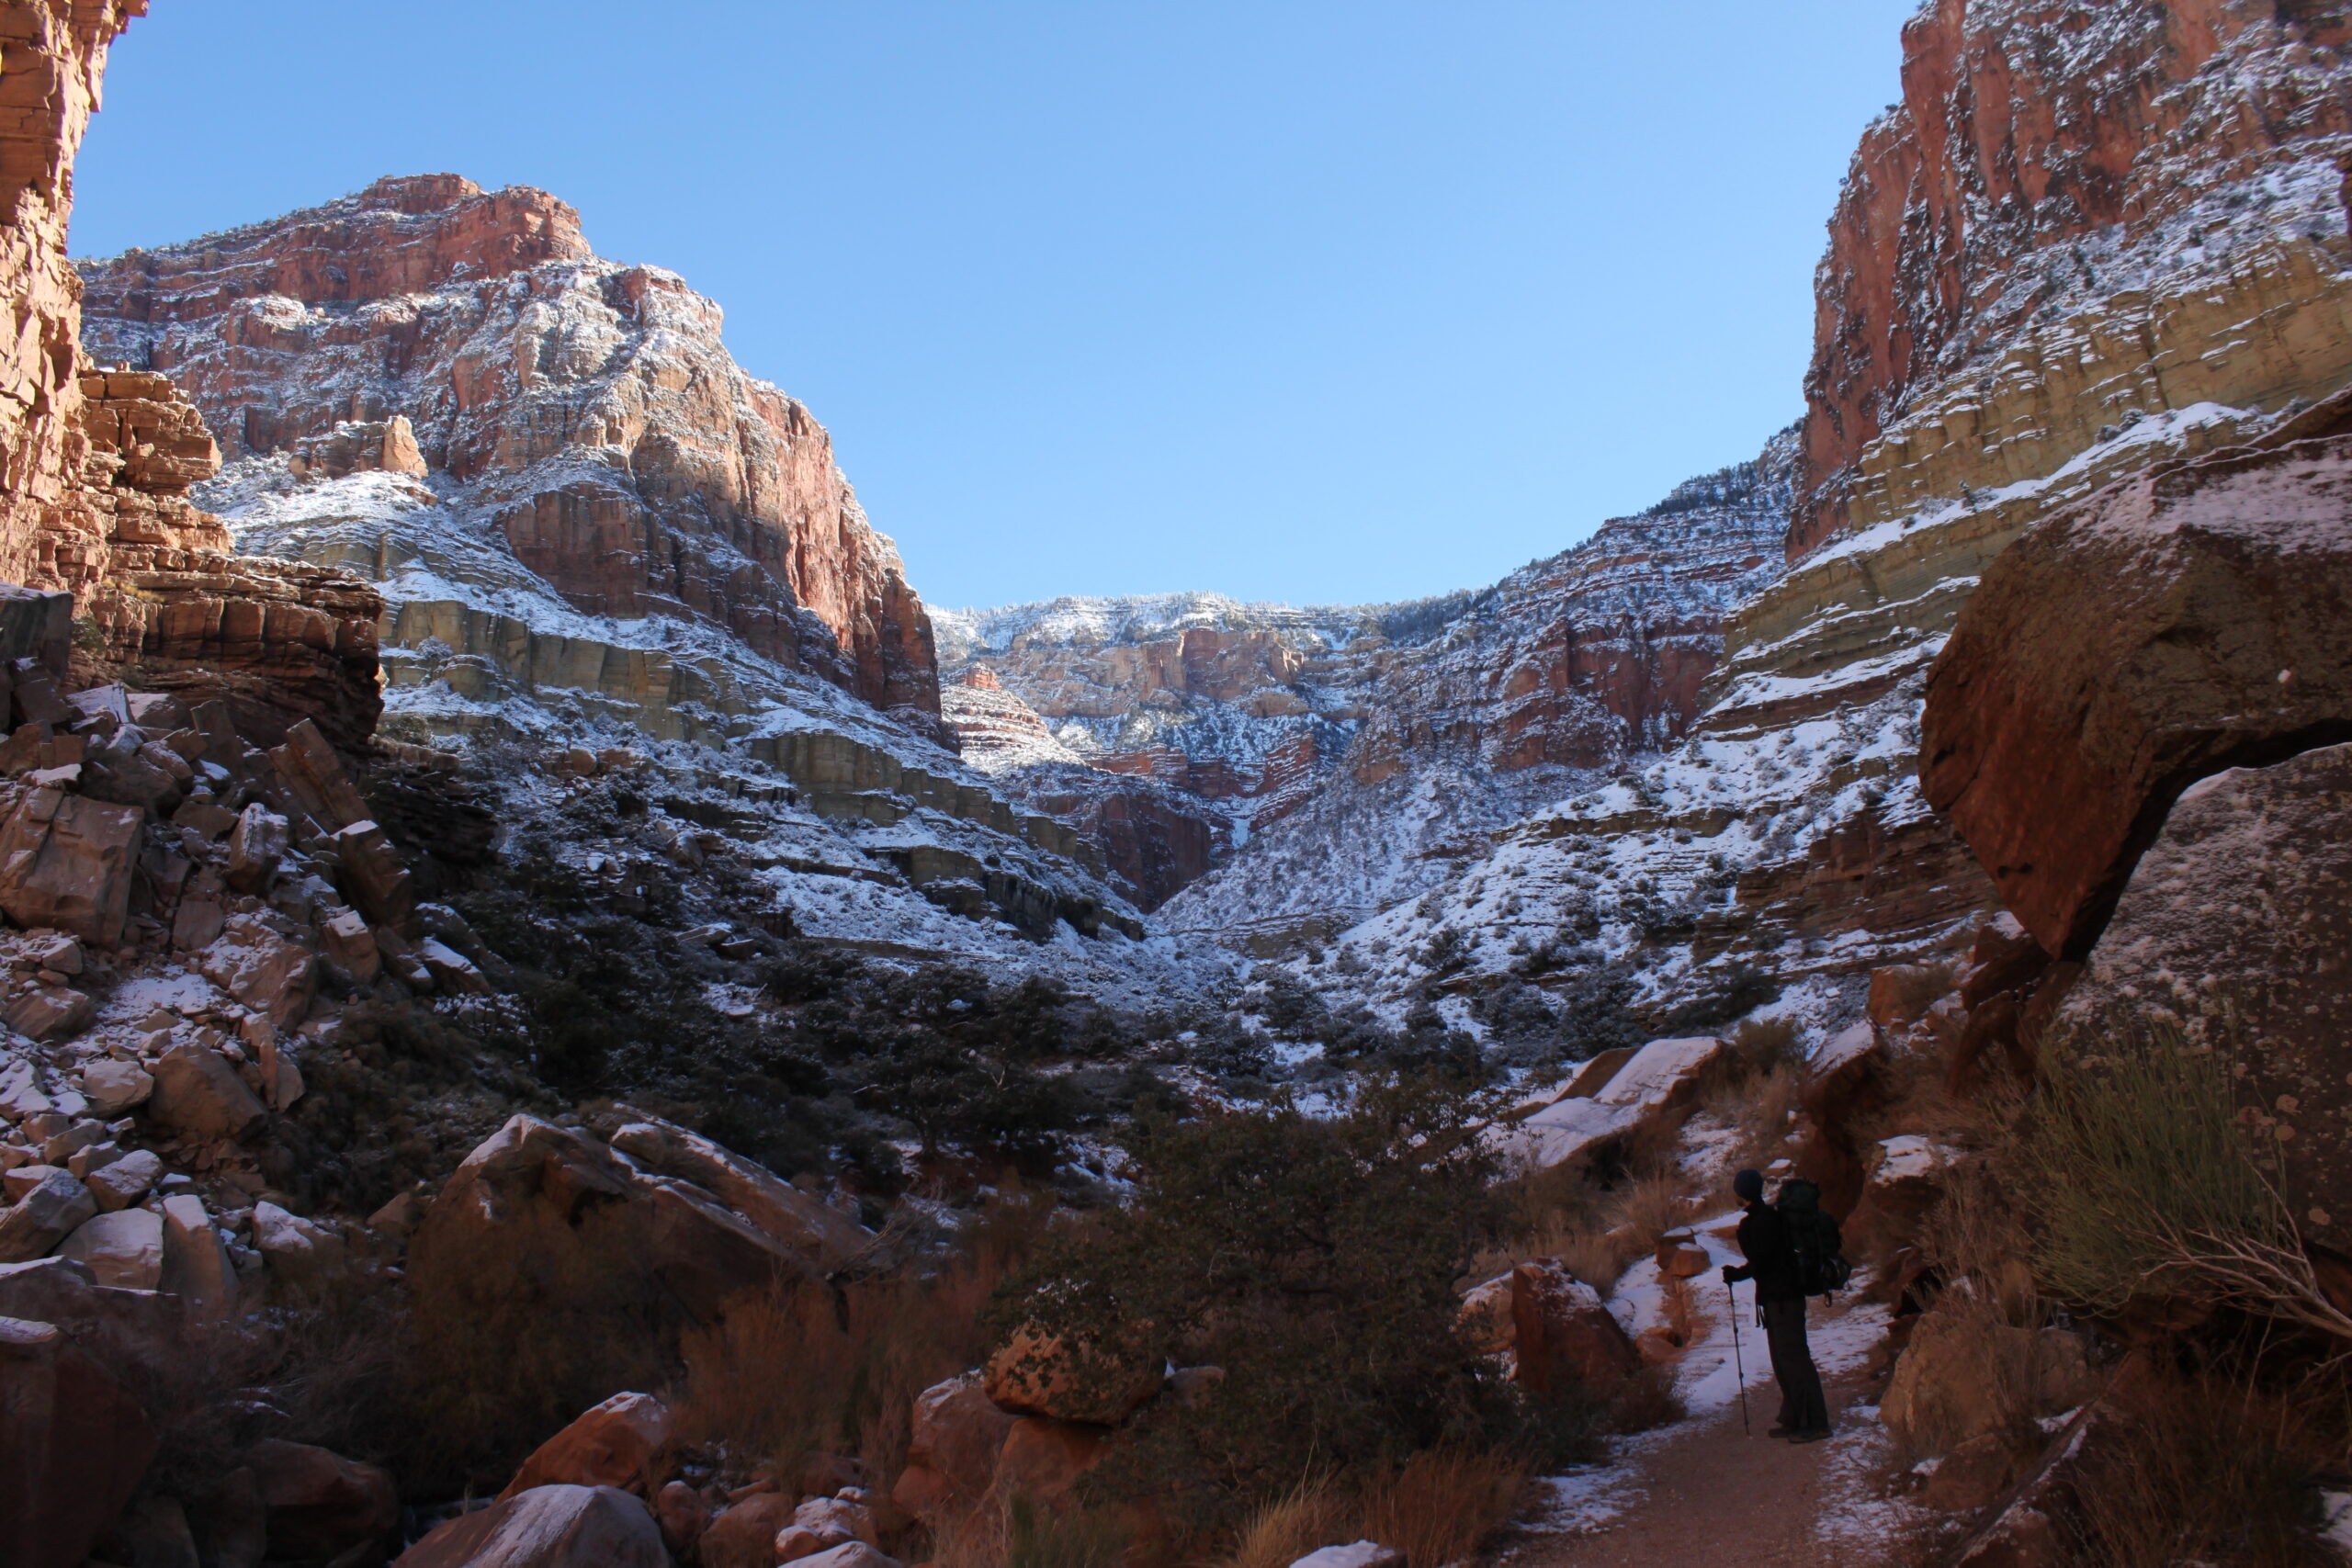 Brian looks at the snowy North Kaibab Trail.